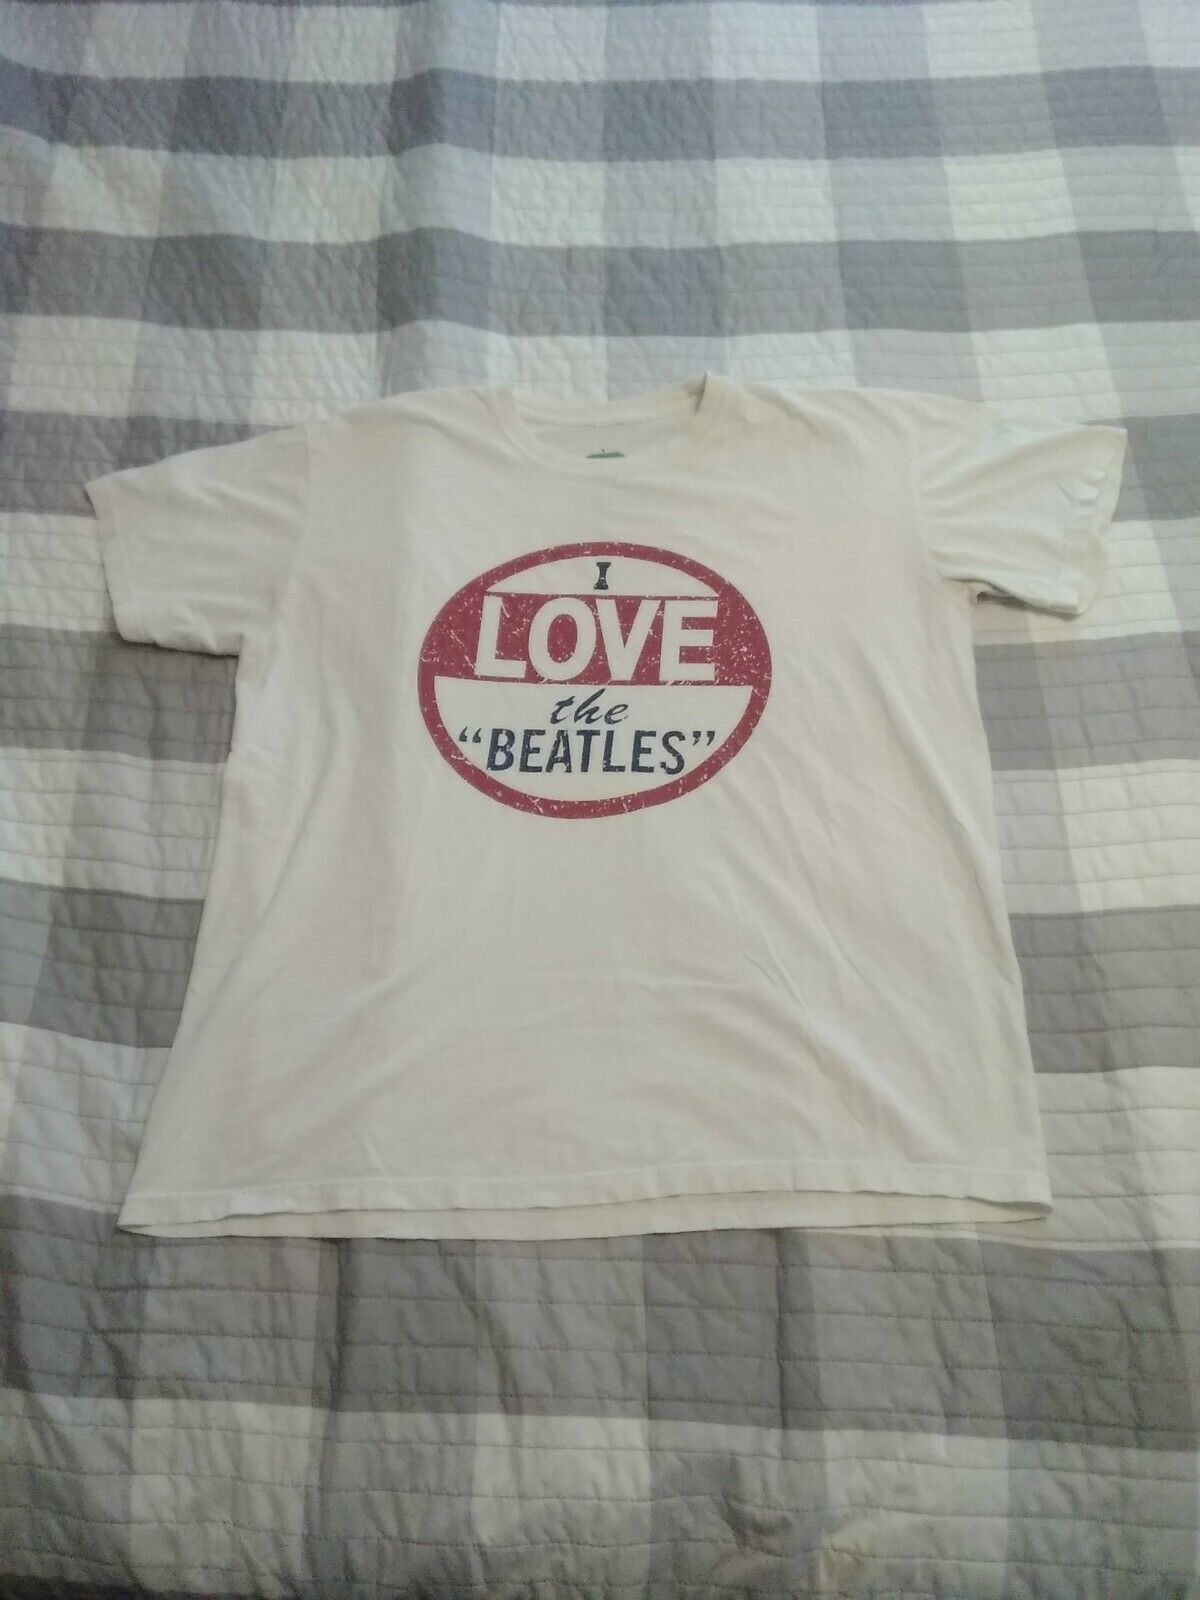 I Love the Beatles 2011 Apple Corp.T-Shirt Size Large Made in the UK 100% Cotton